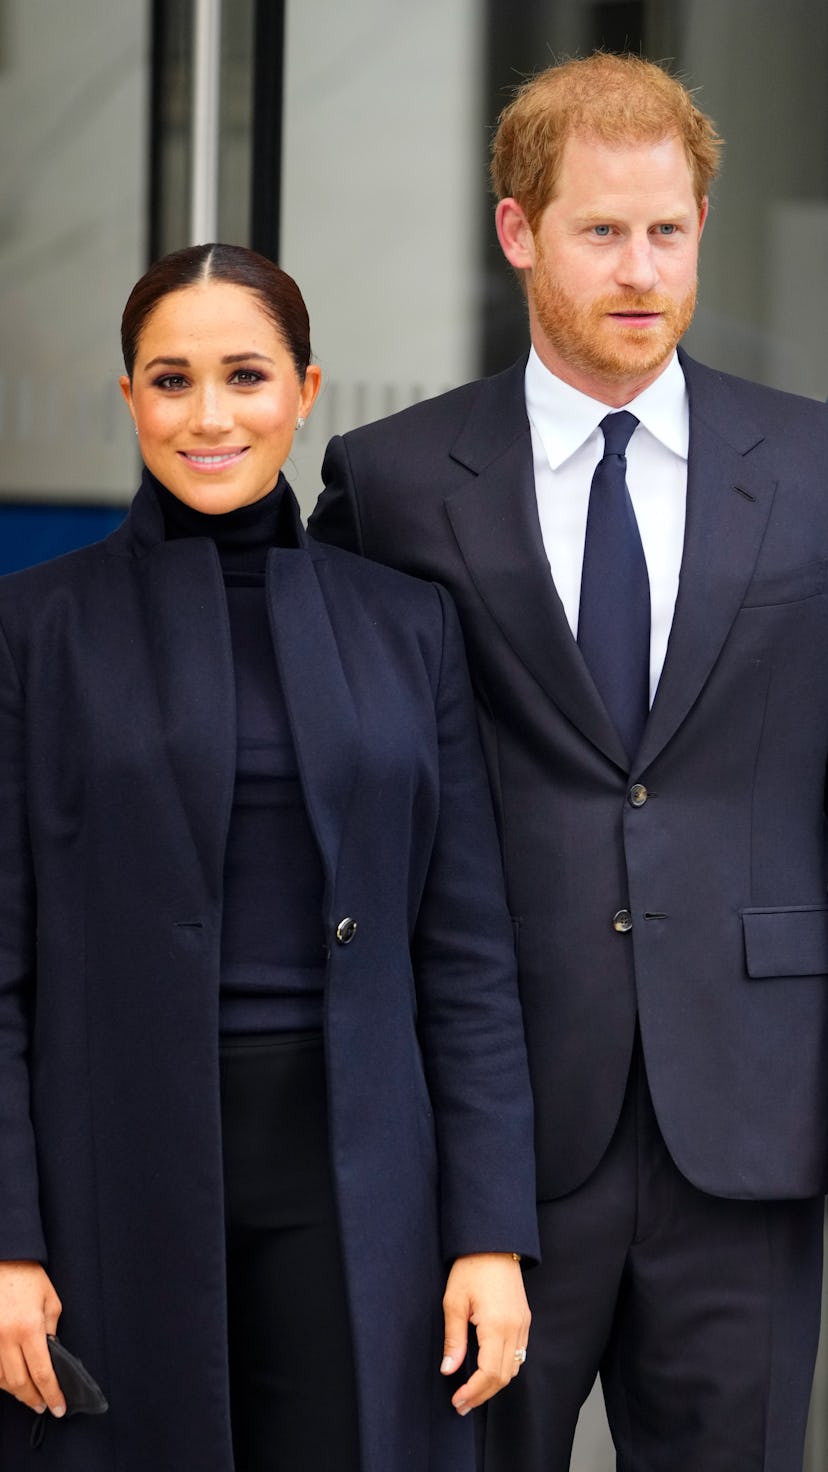 Meghan Markle's New York fashion looks included hidden nods to Princess Diana, Michelle Obama, and m...